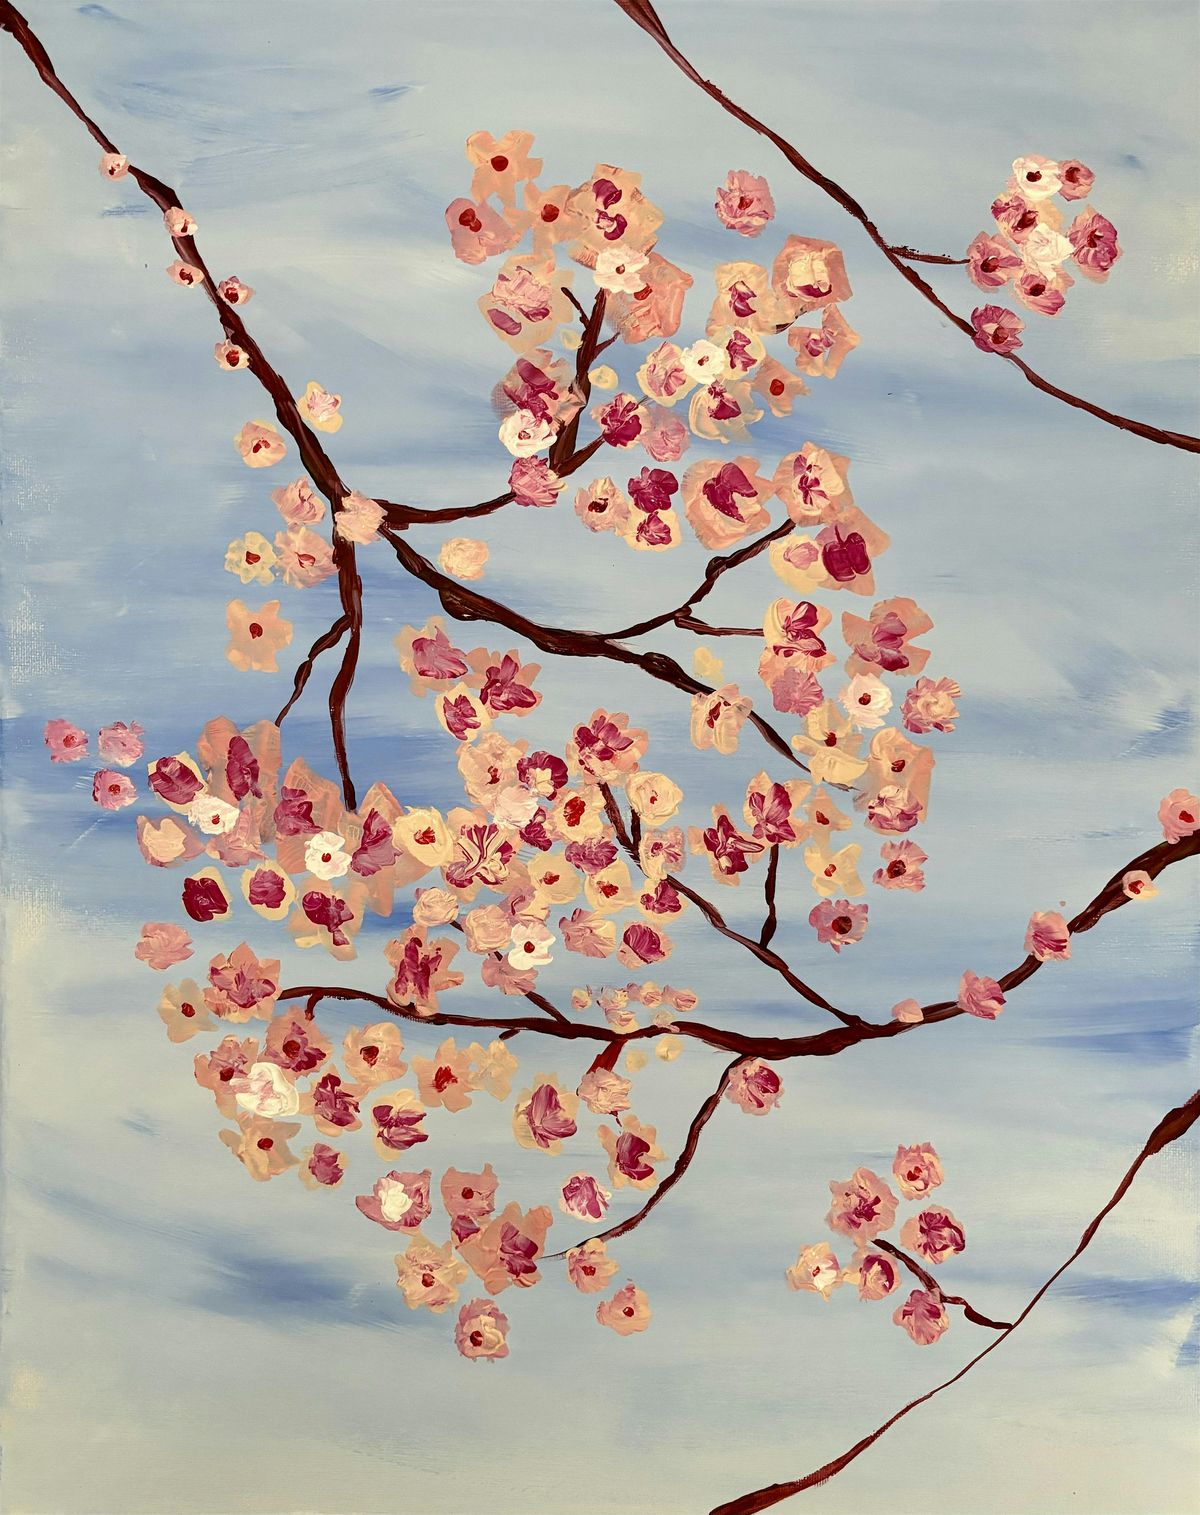 Cherry Blossom Painting Workshop